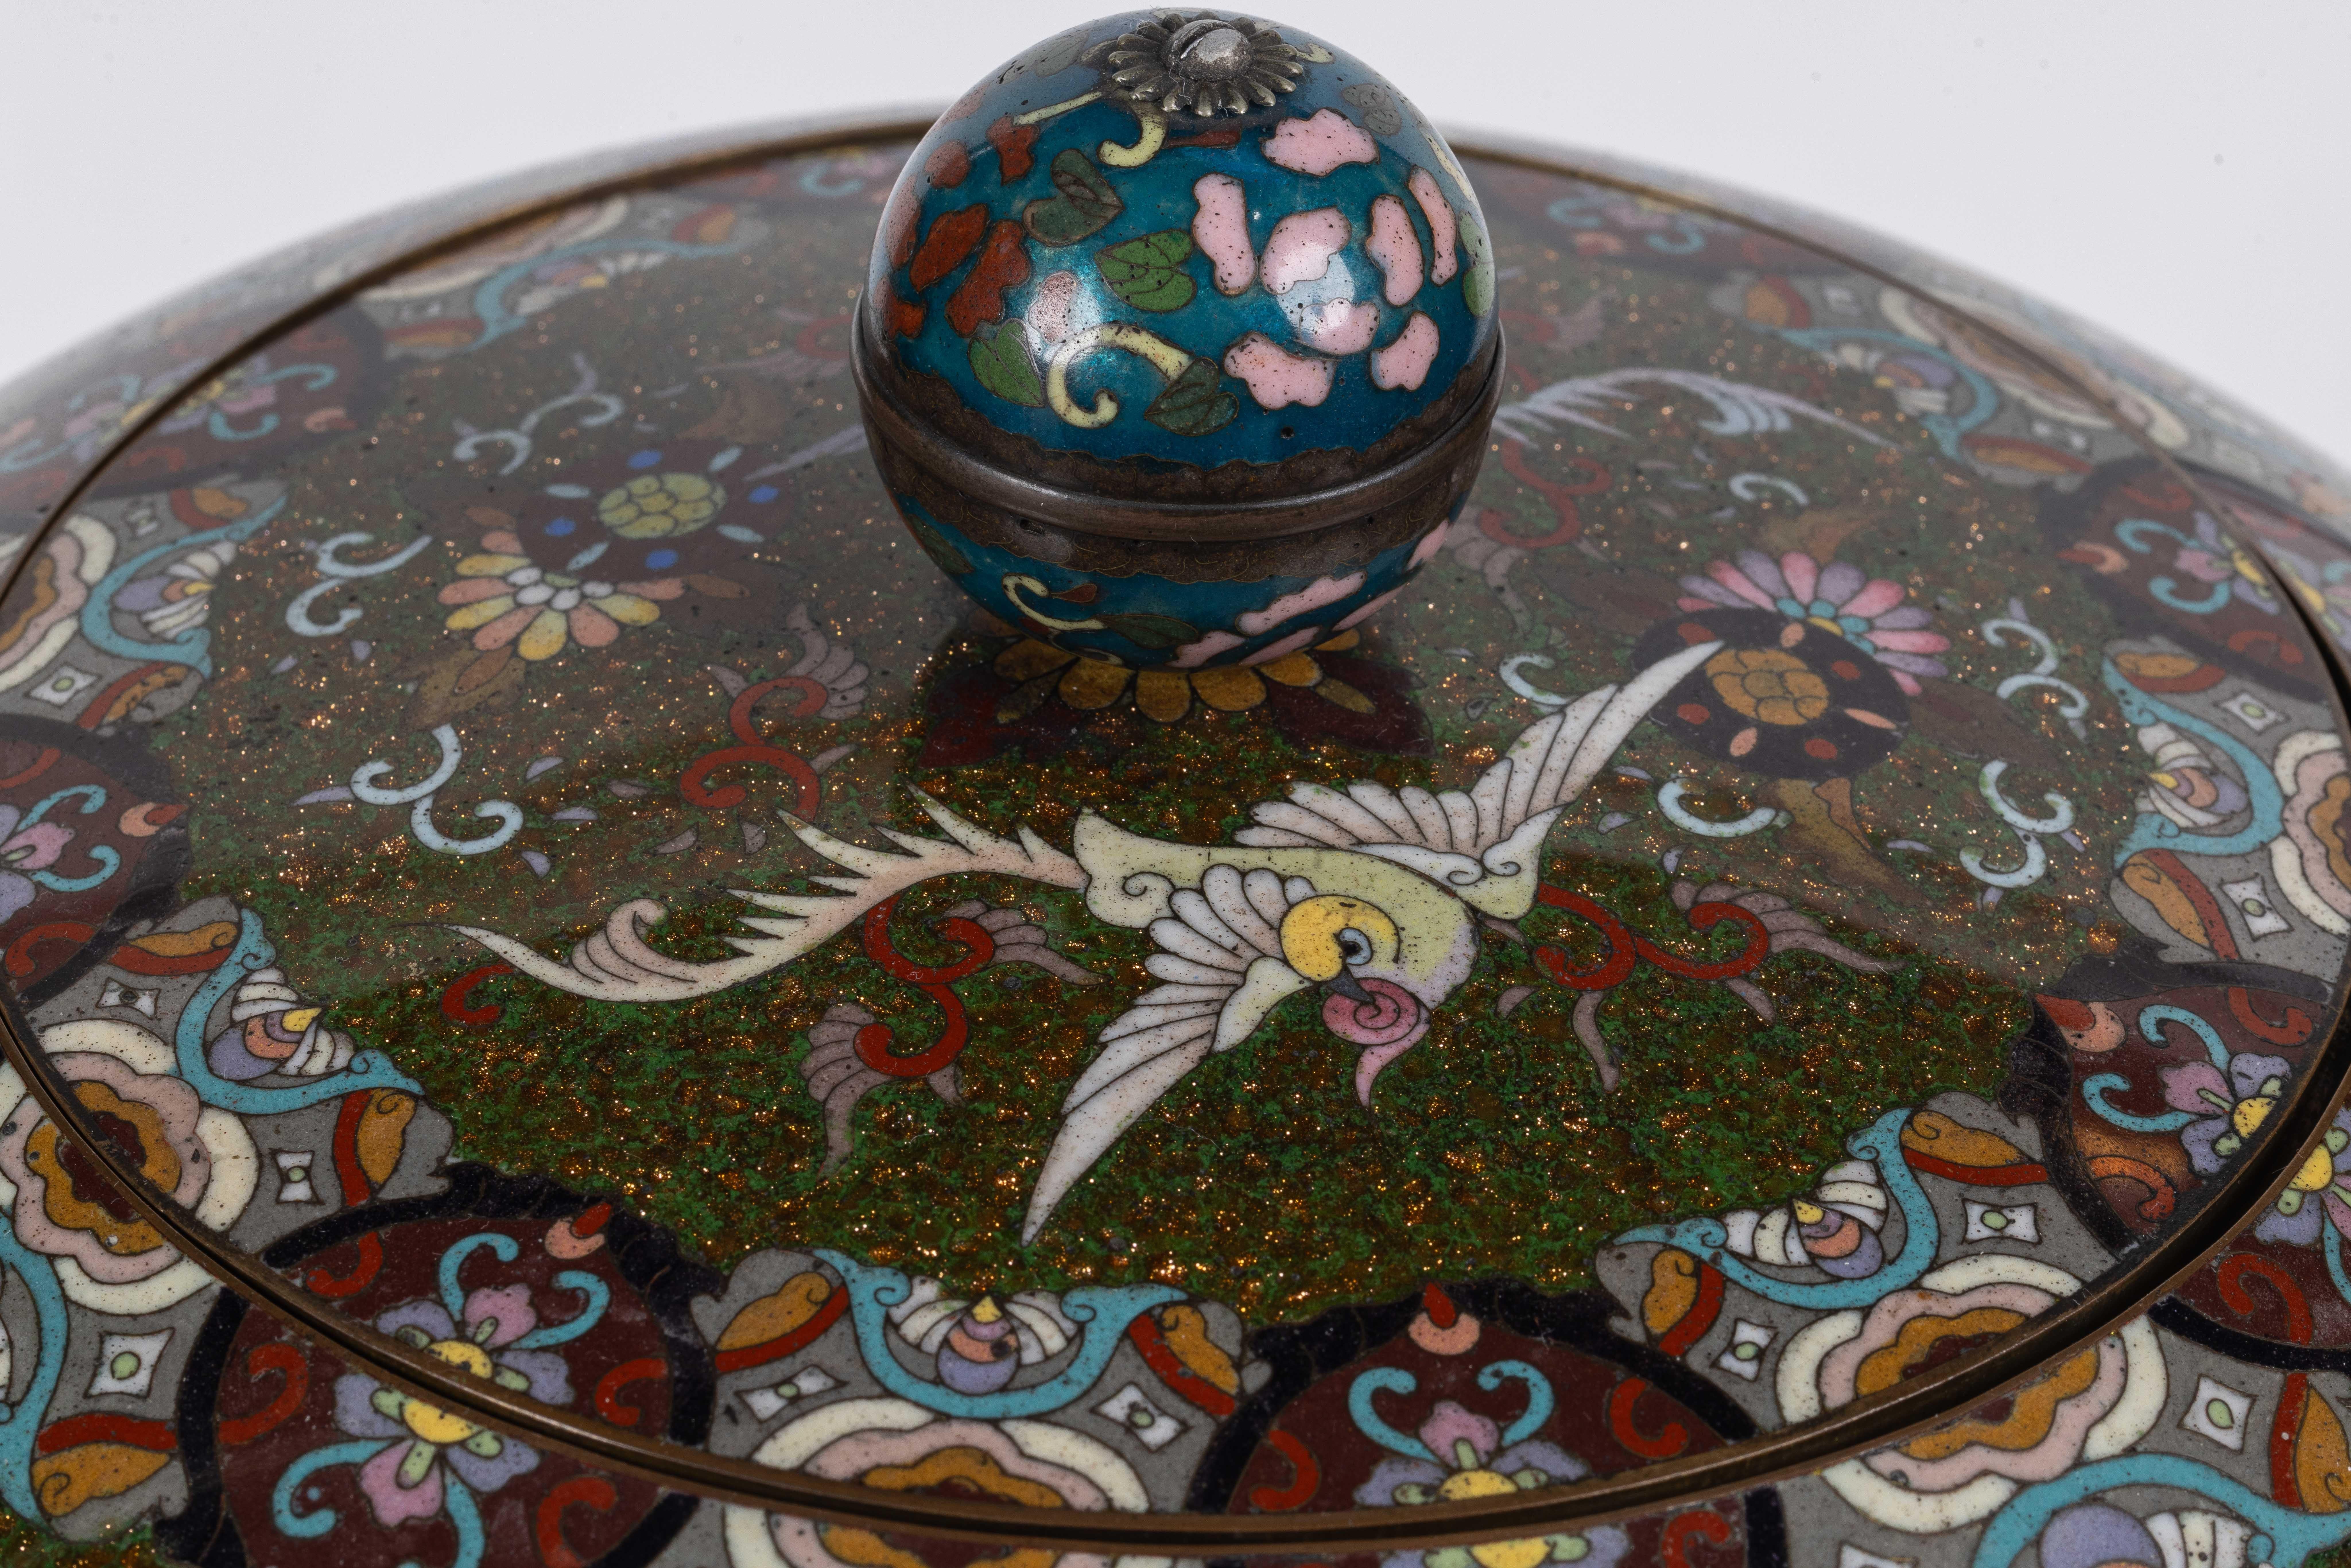 Majestic Japanese Cloisonne Enamel Covered Jar with Dragons, Theater Characters  For Sale 3